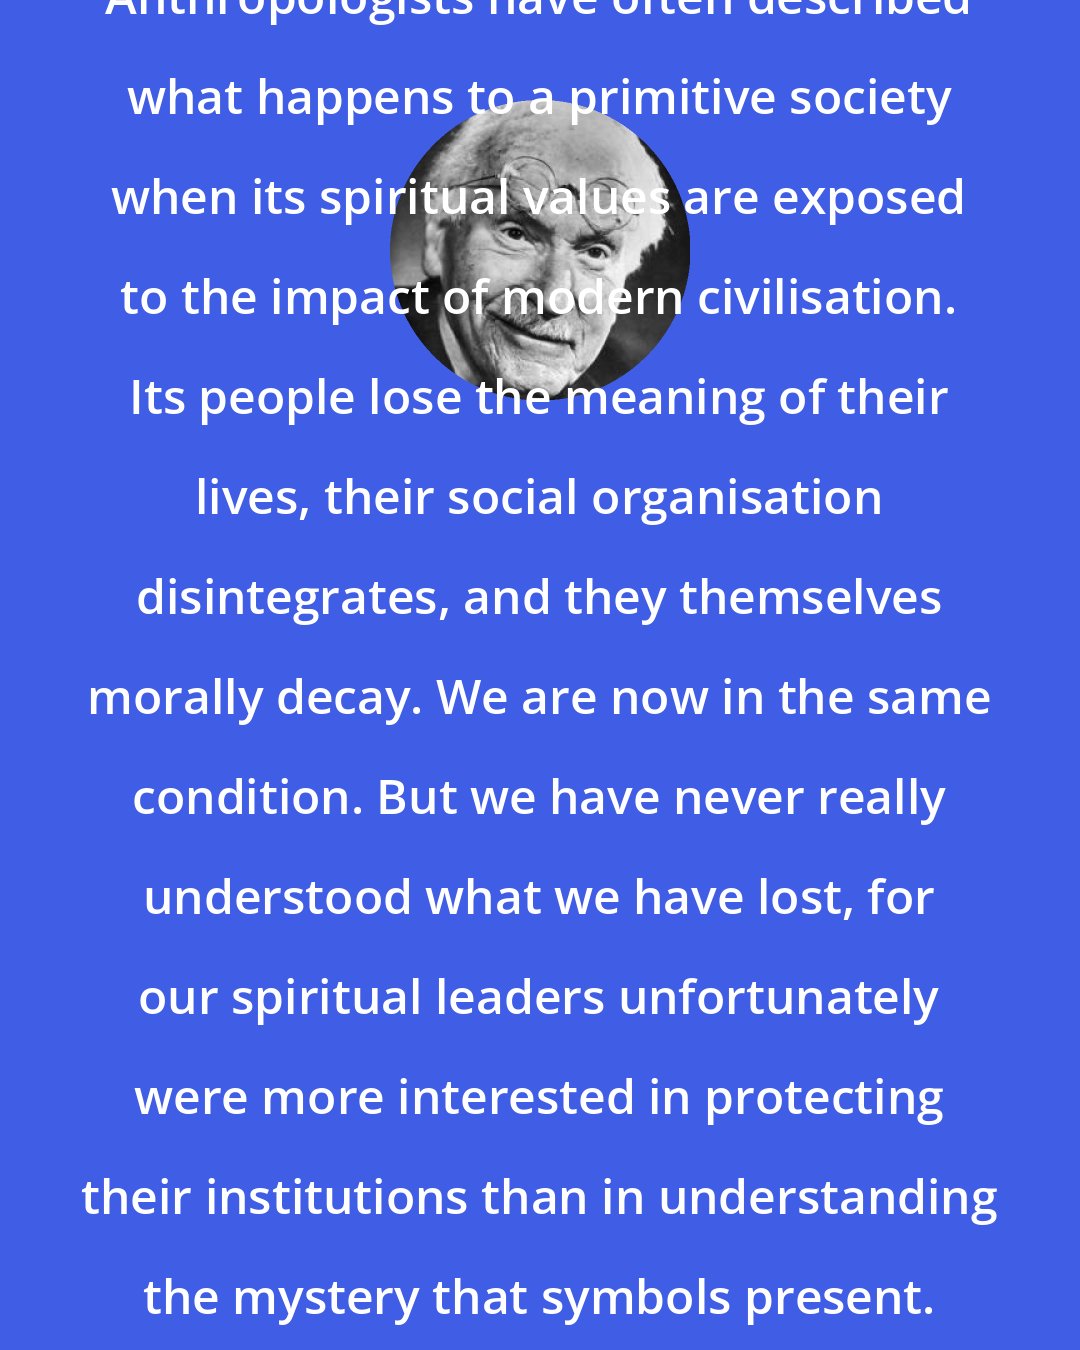 Carl Jung: Anthropologists have often described what happens to a primitive society when its spiritual values are exposed to the impact of modern civilisation. Its people lose the meaning of their lives, their social organisation disintegrates, and they themselves morally decay. We are now in the same condition. But we have never really understood what we have lost, for our spiritual leaders unfortunately were more interested in protecting their institutions than in understanding the mystery that symbols present.